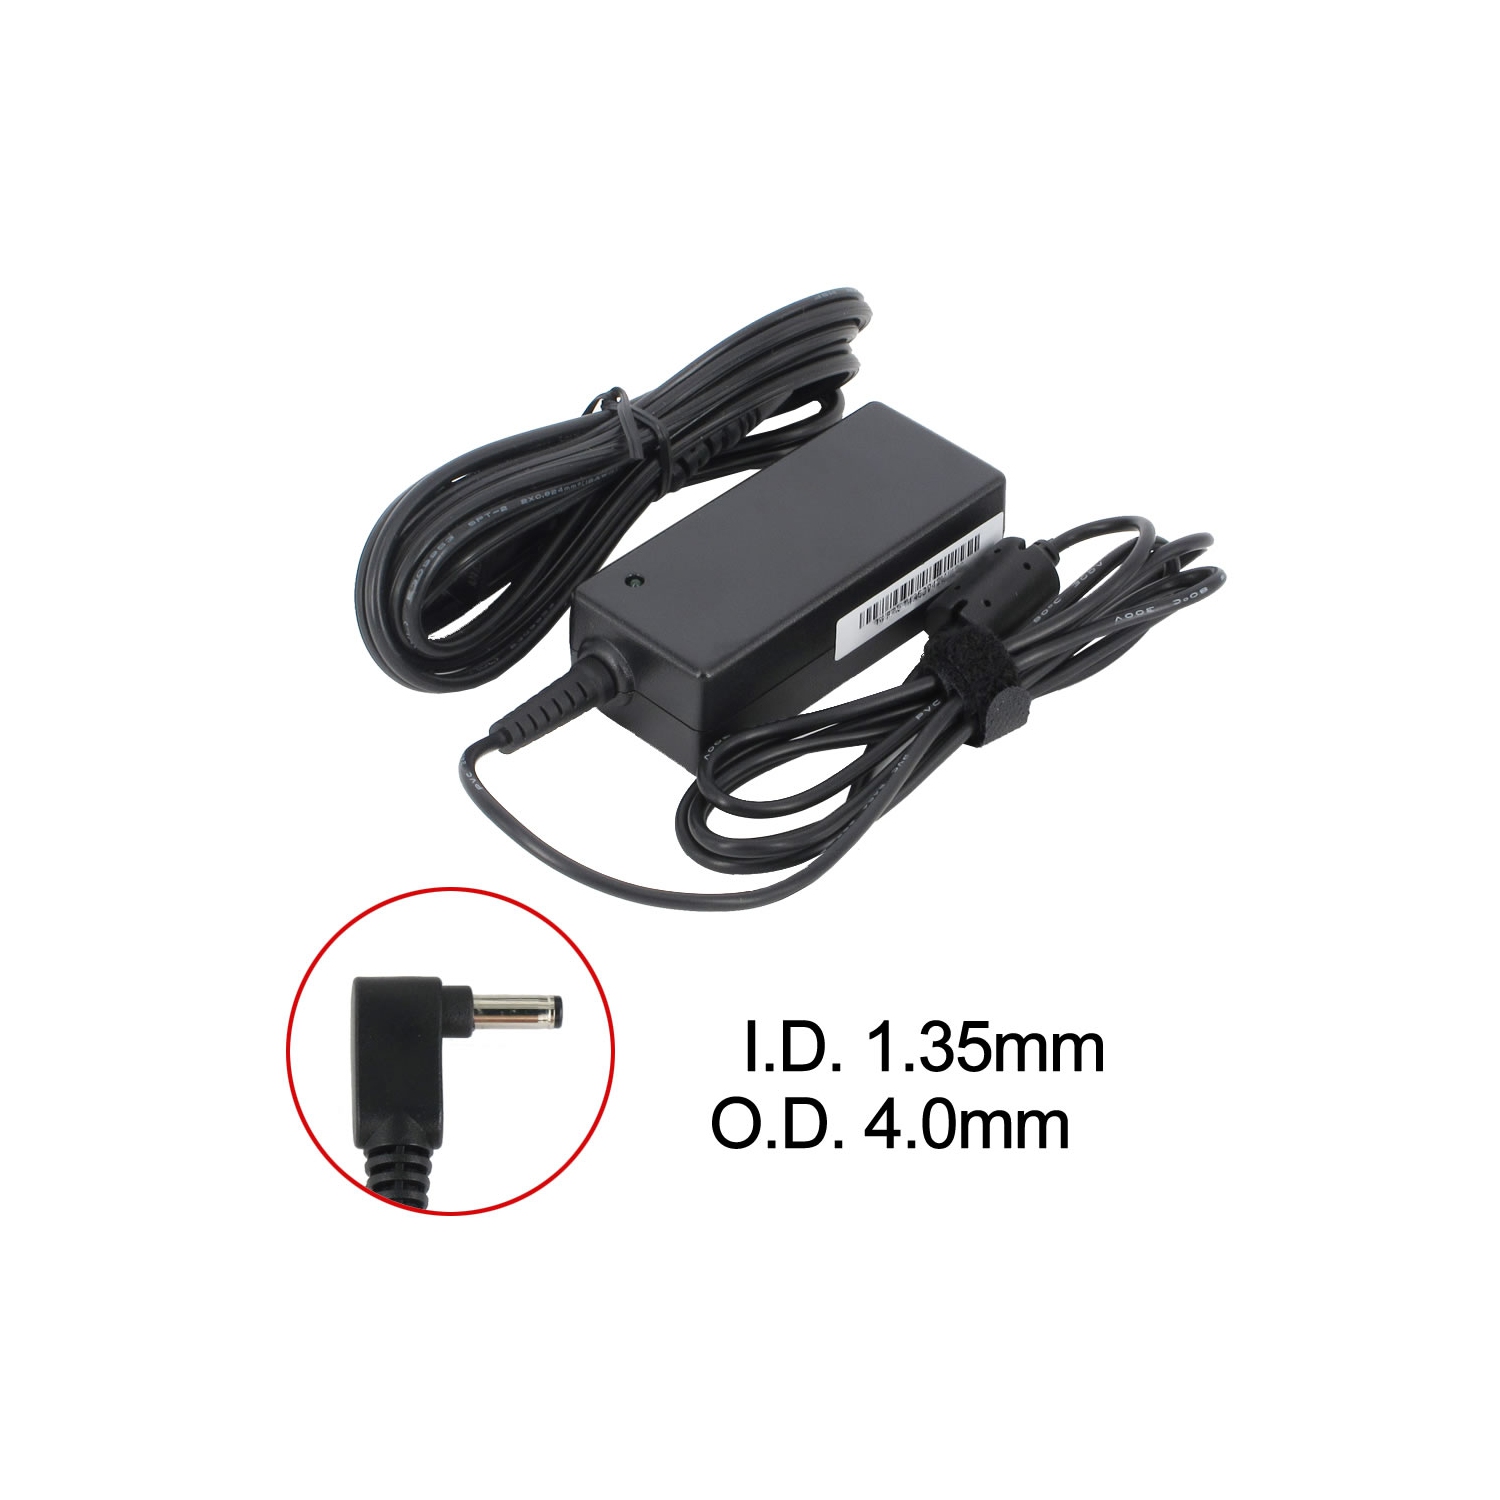 BattDepot: New Laptop AC Adapter for Asus X540SA-XX085T, 0A001-00230400, 0A001-00330100, EXA1206EH